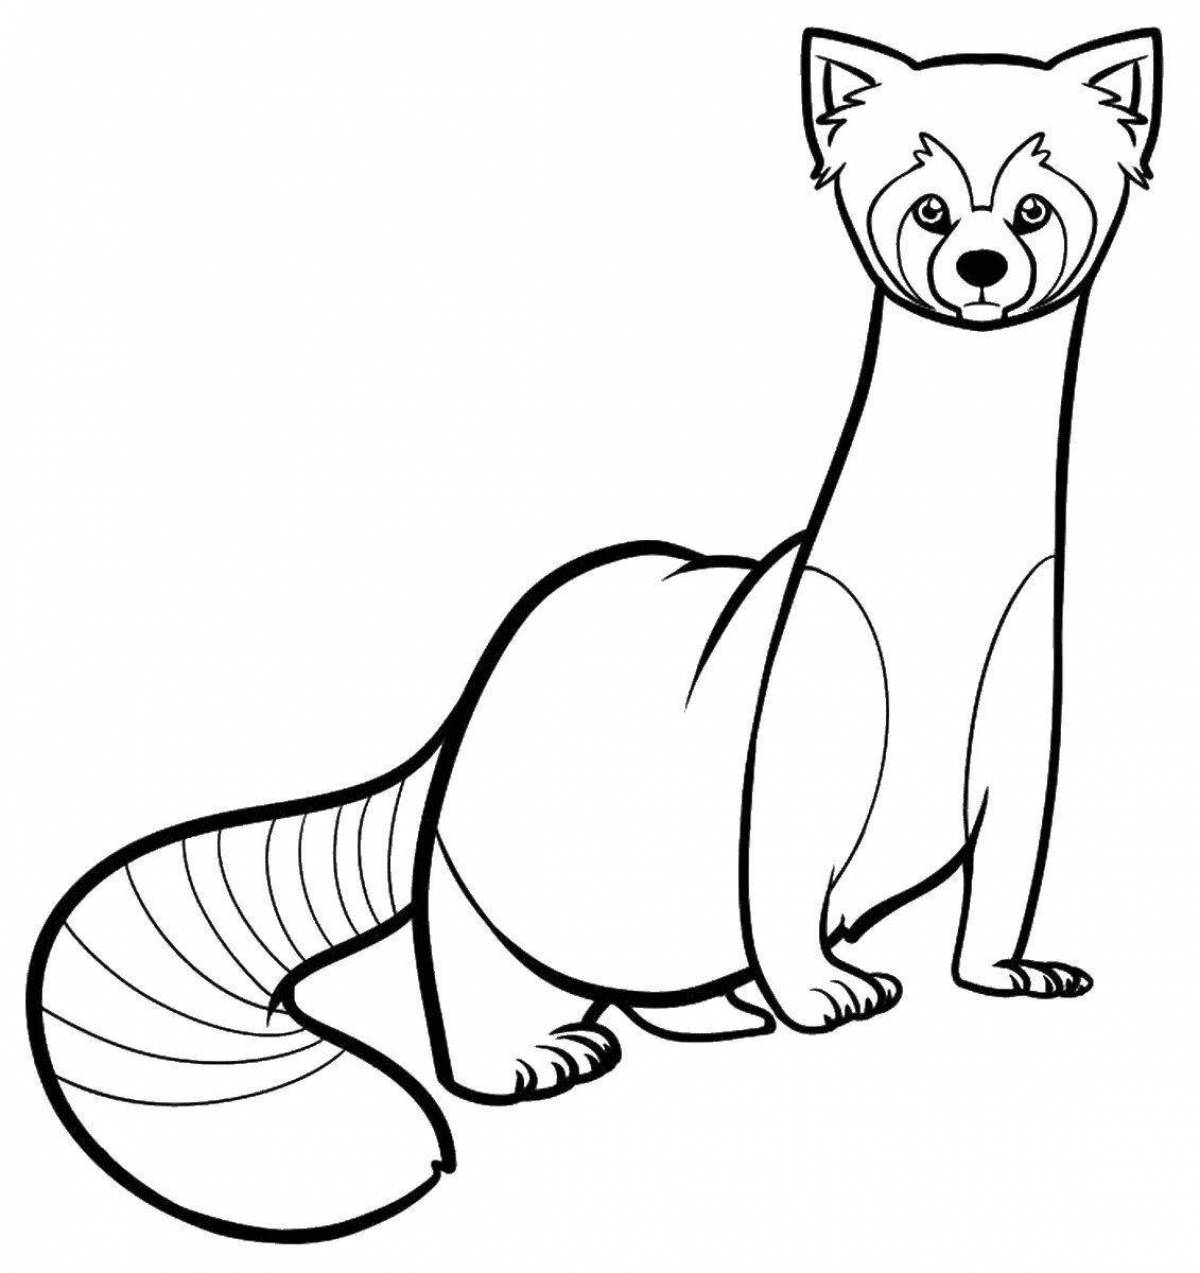 Coloring page wild weasel